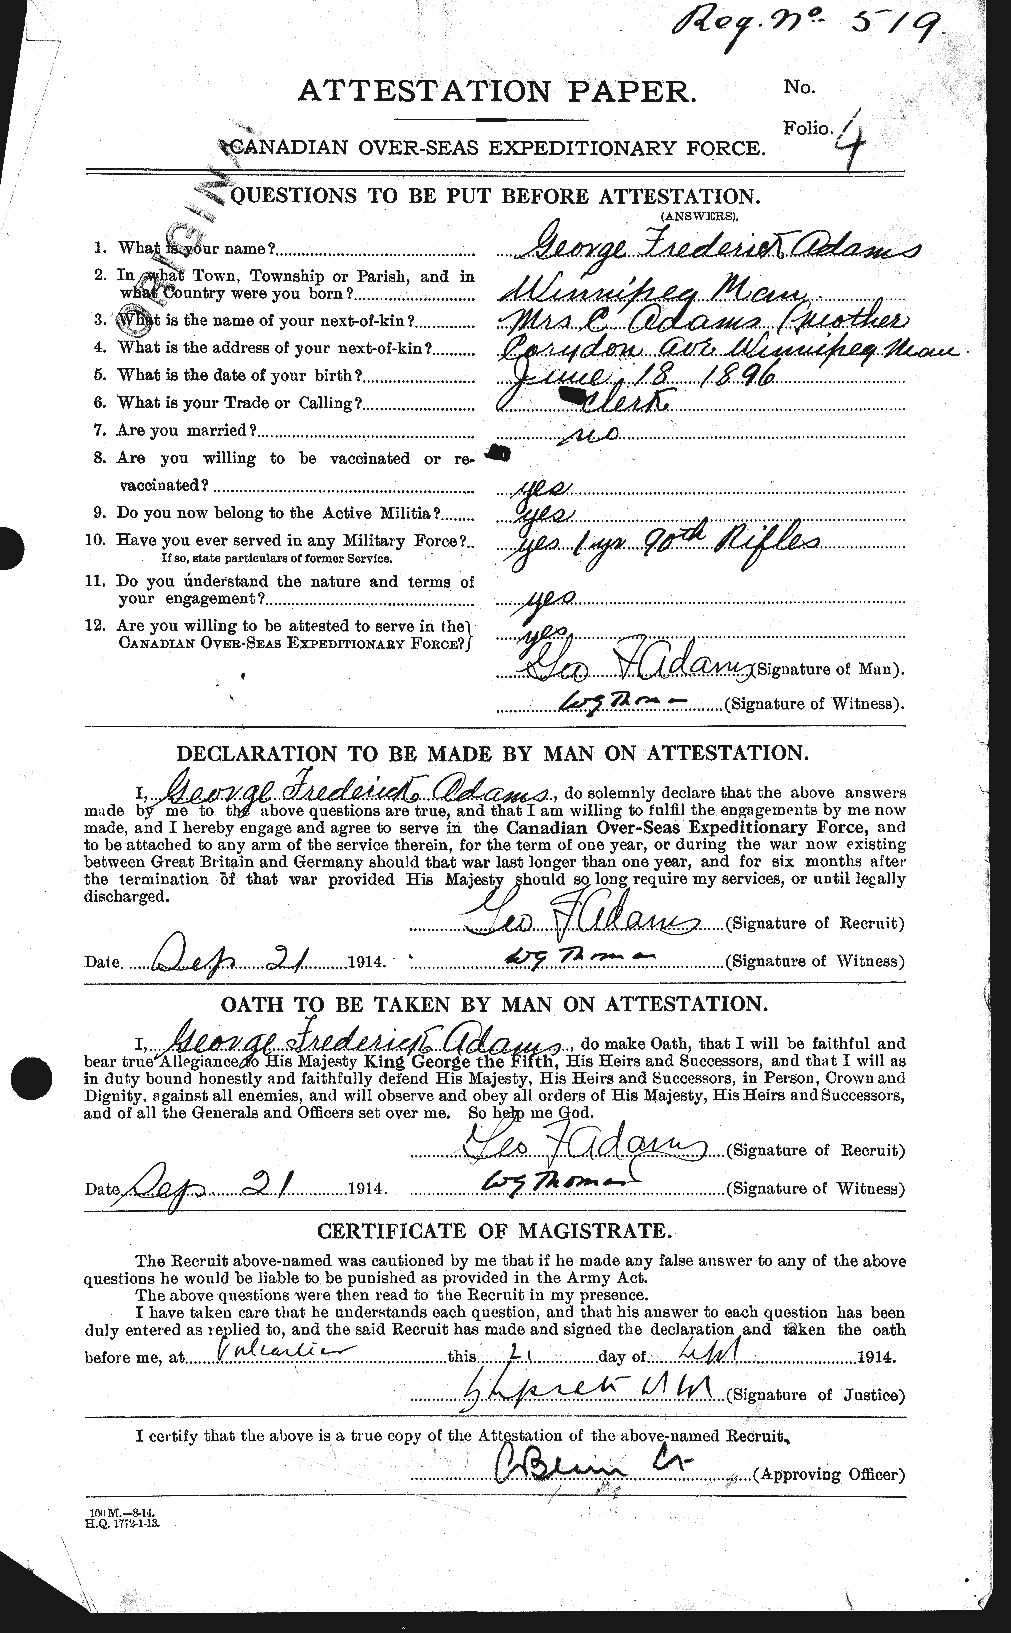 Personnel Records of the First World War - CEF 202560a